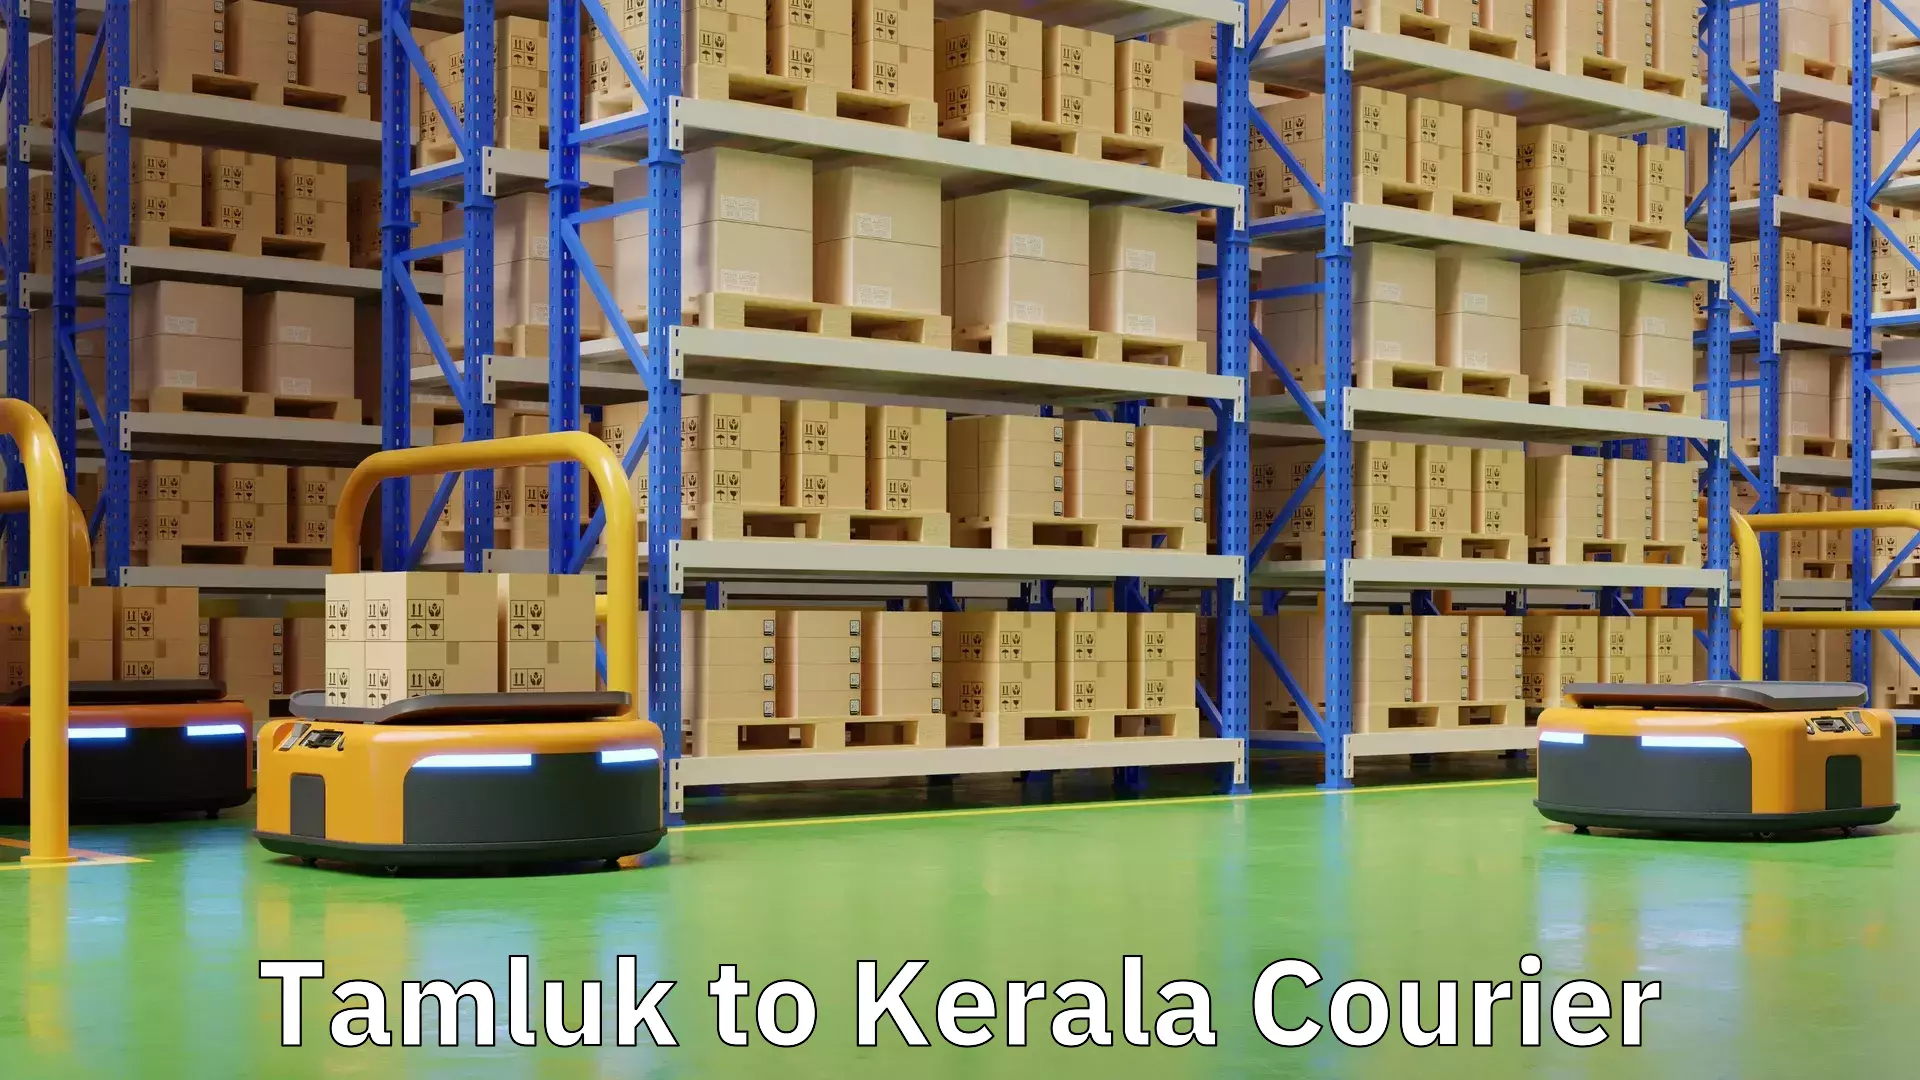 Flexible delivery schedules Tamluk to Kerala